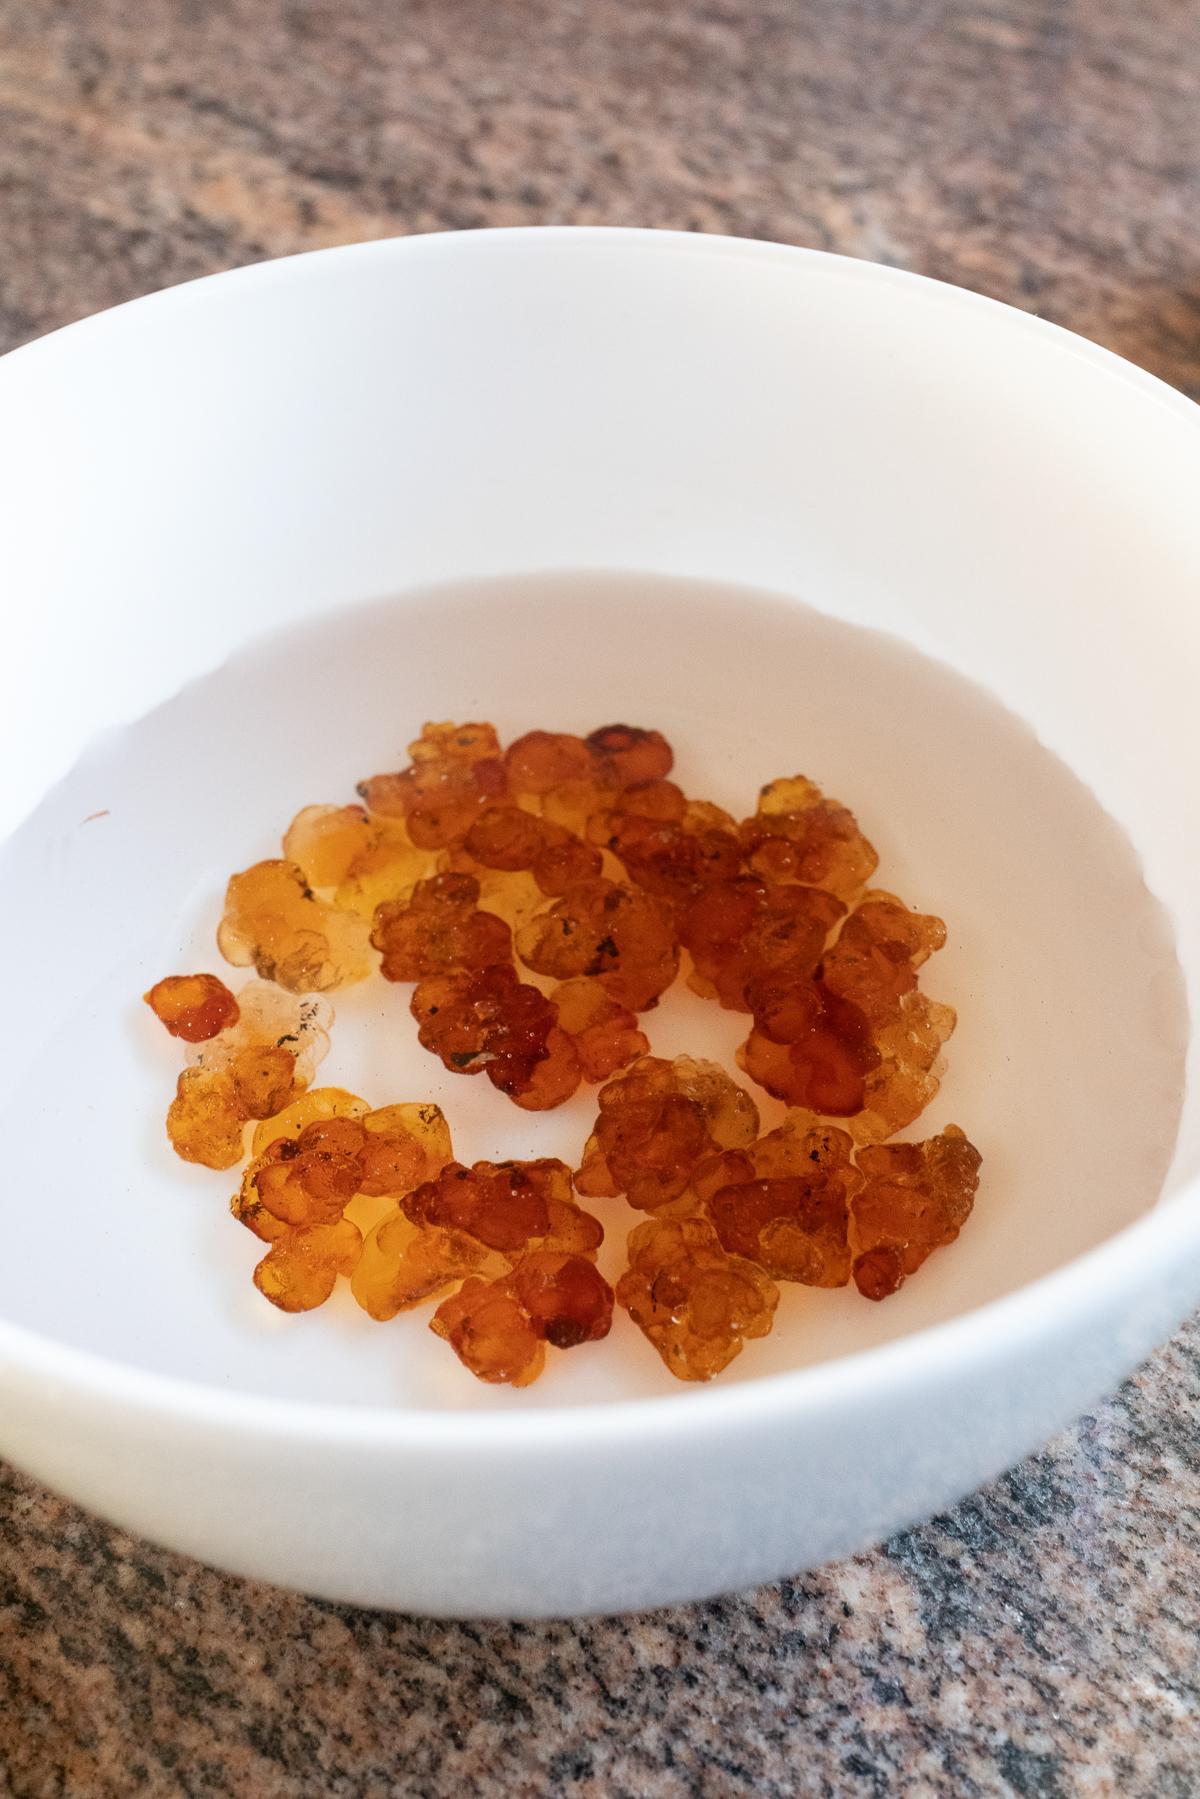 Soaking peach gum in a bowl of water to rehydrate.